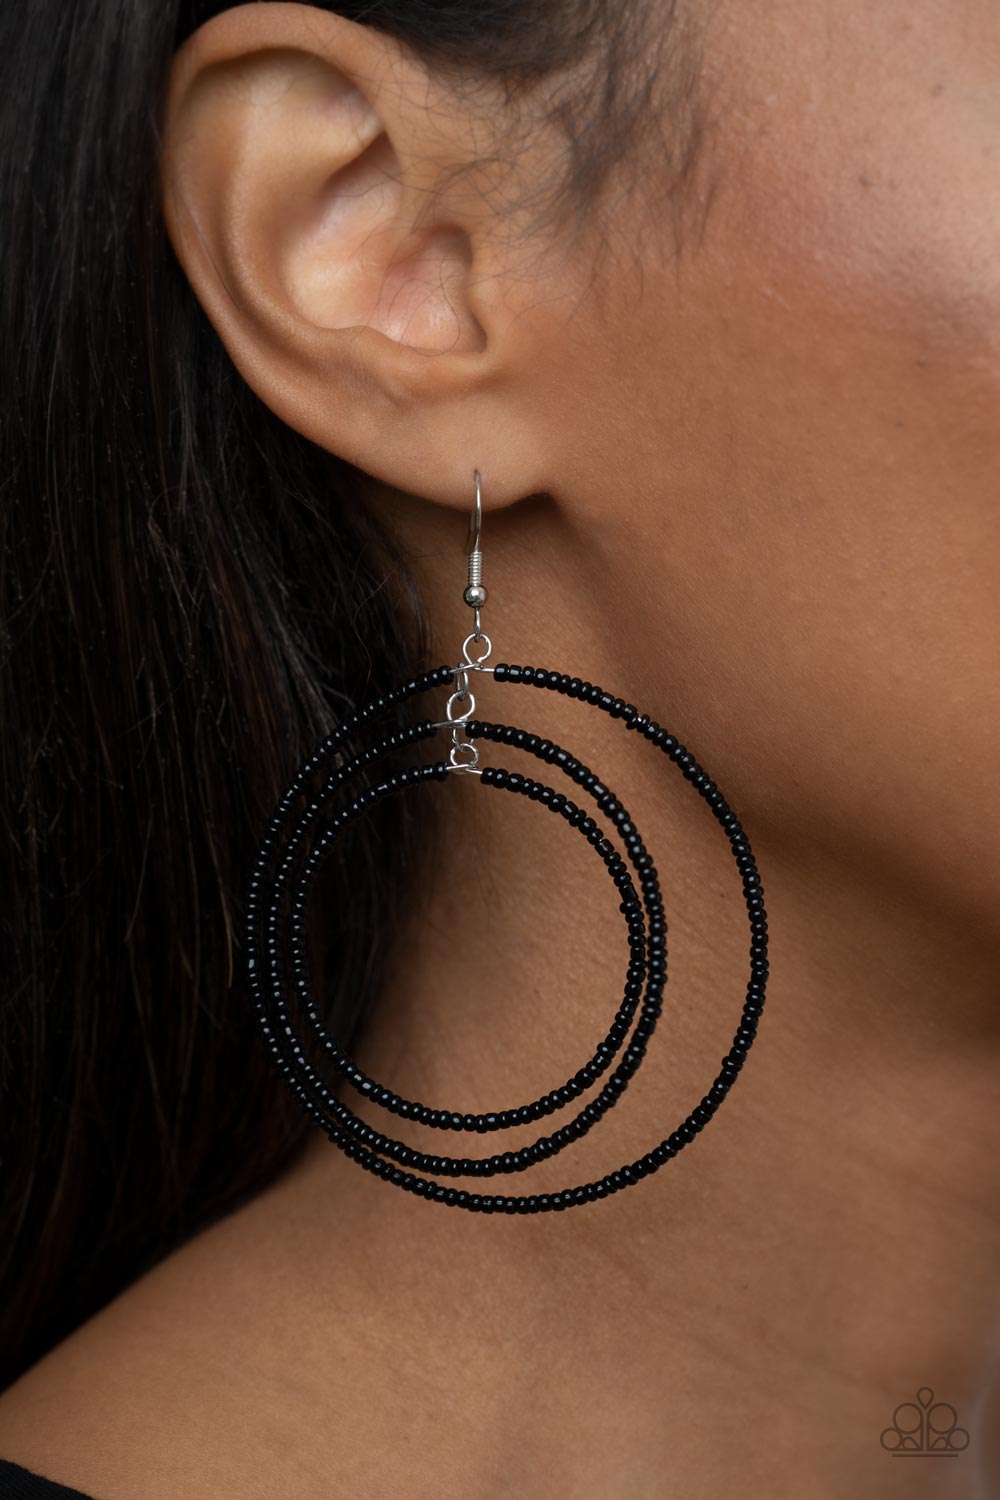 Three oversized rings of dainty black seed beads ripple into colorfully layered hoopsThree oversized rings of dainty black seed beads ripple into colorfully layered hoops